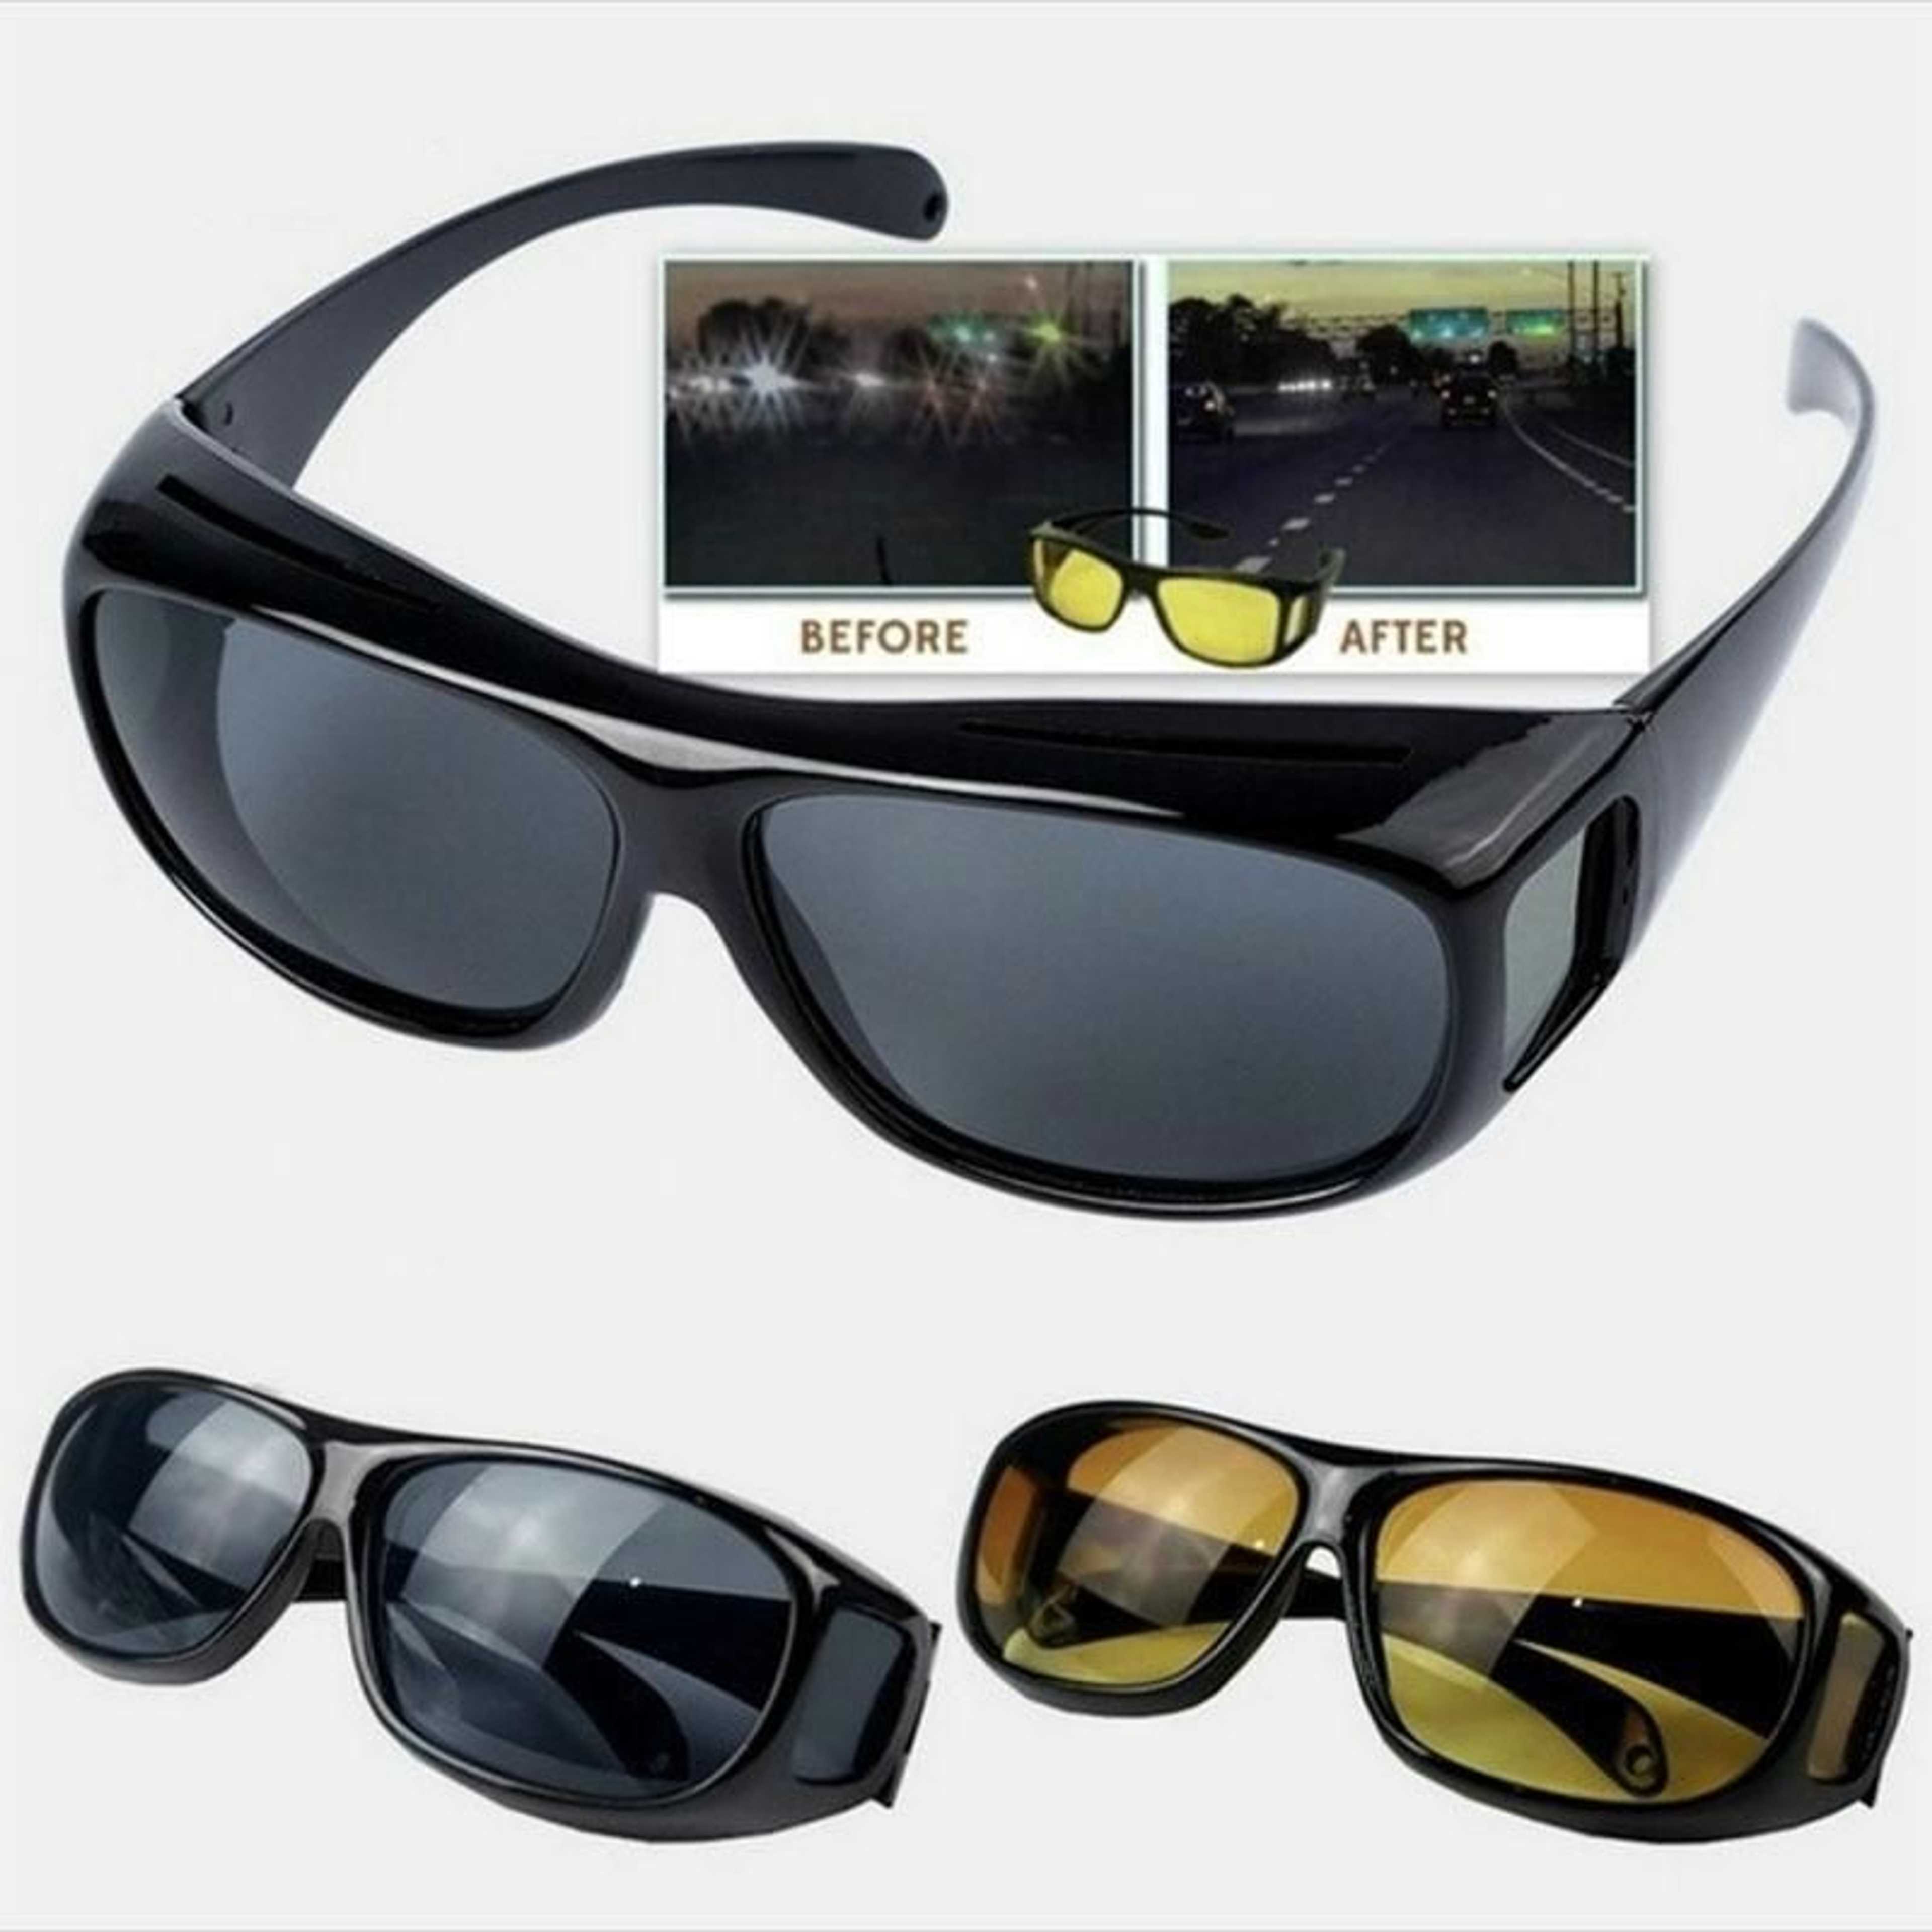 Title: Pack Of 2 HD Night Vision Glasses for Night Driving Protective Eyewear Anti Glare and Sunglasses